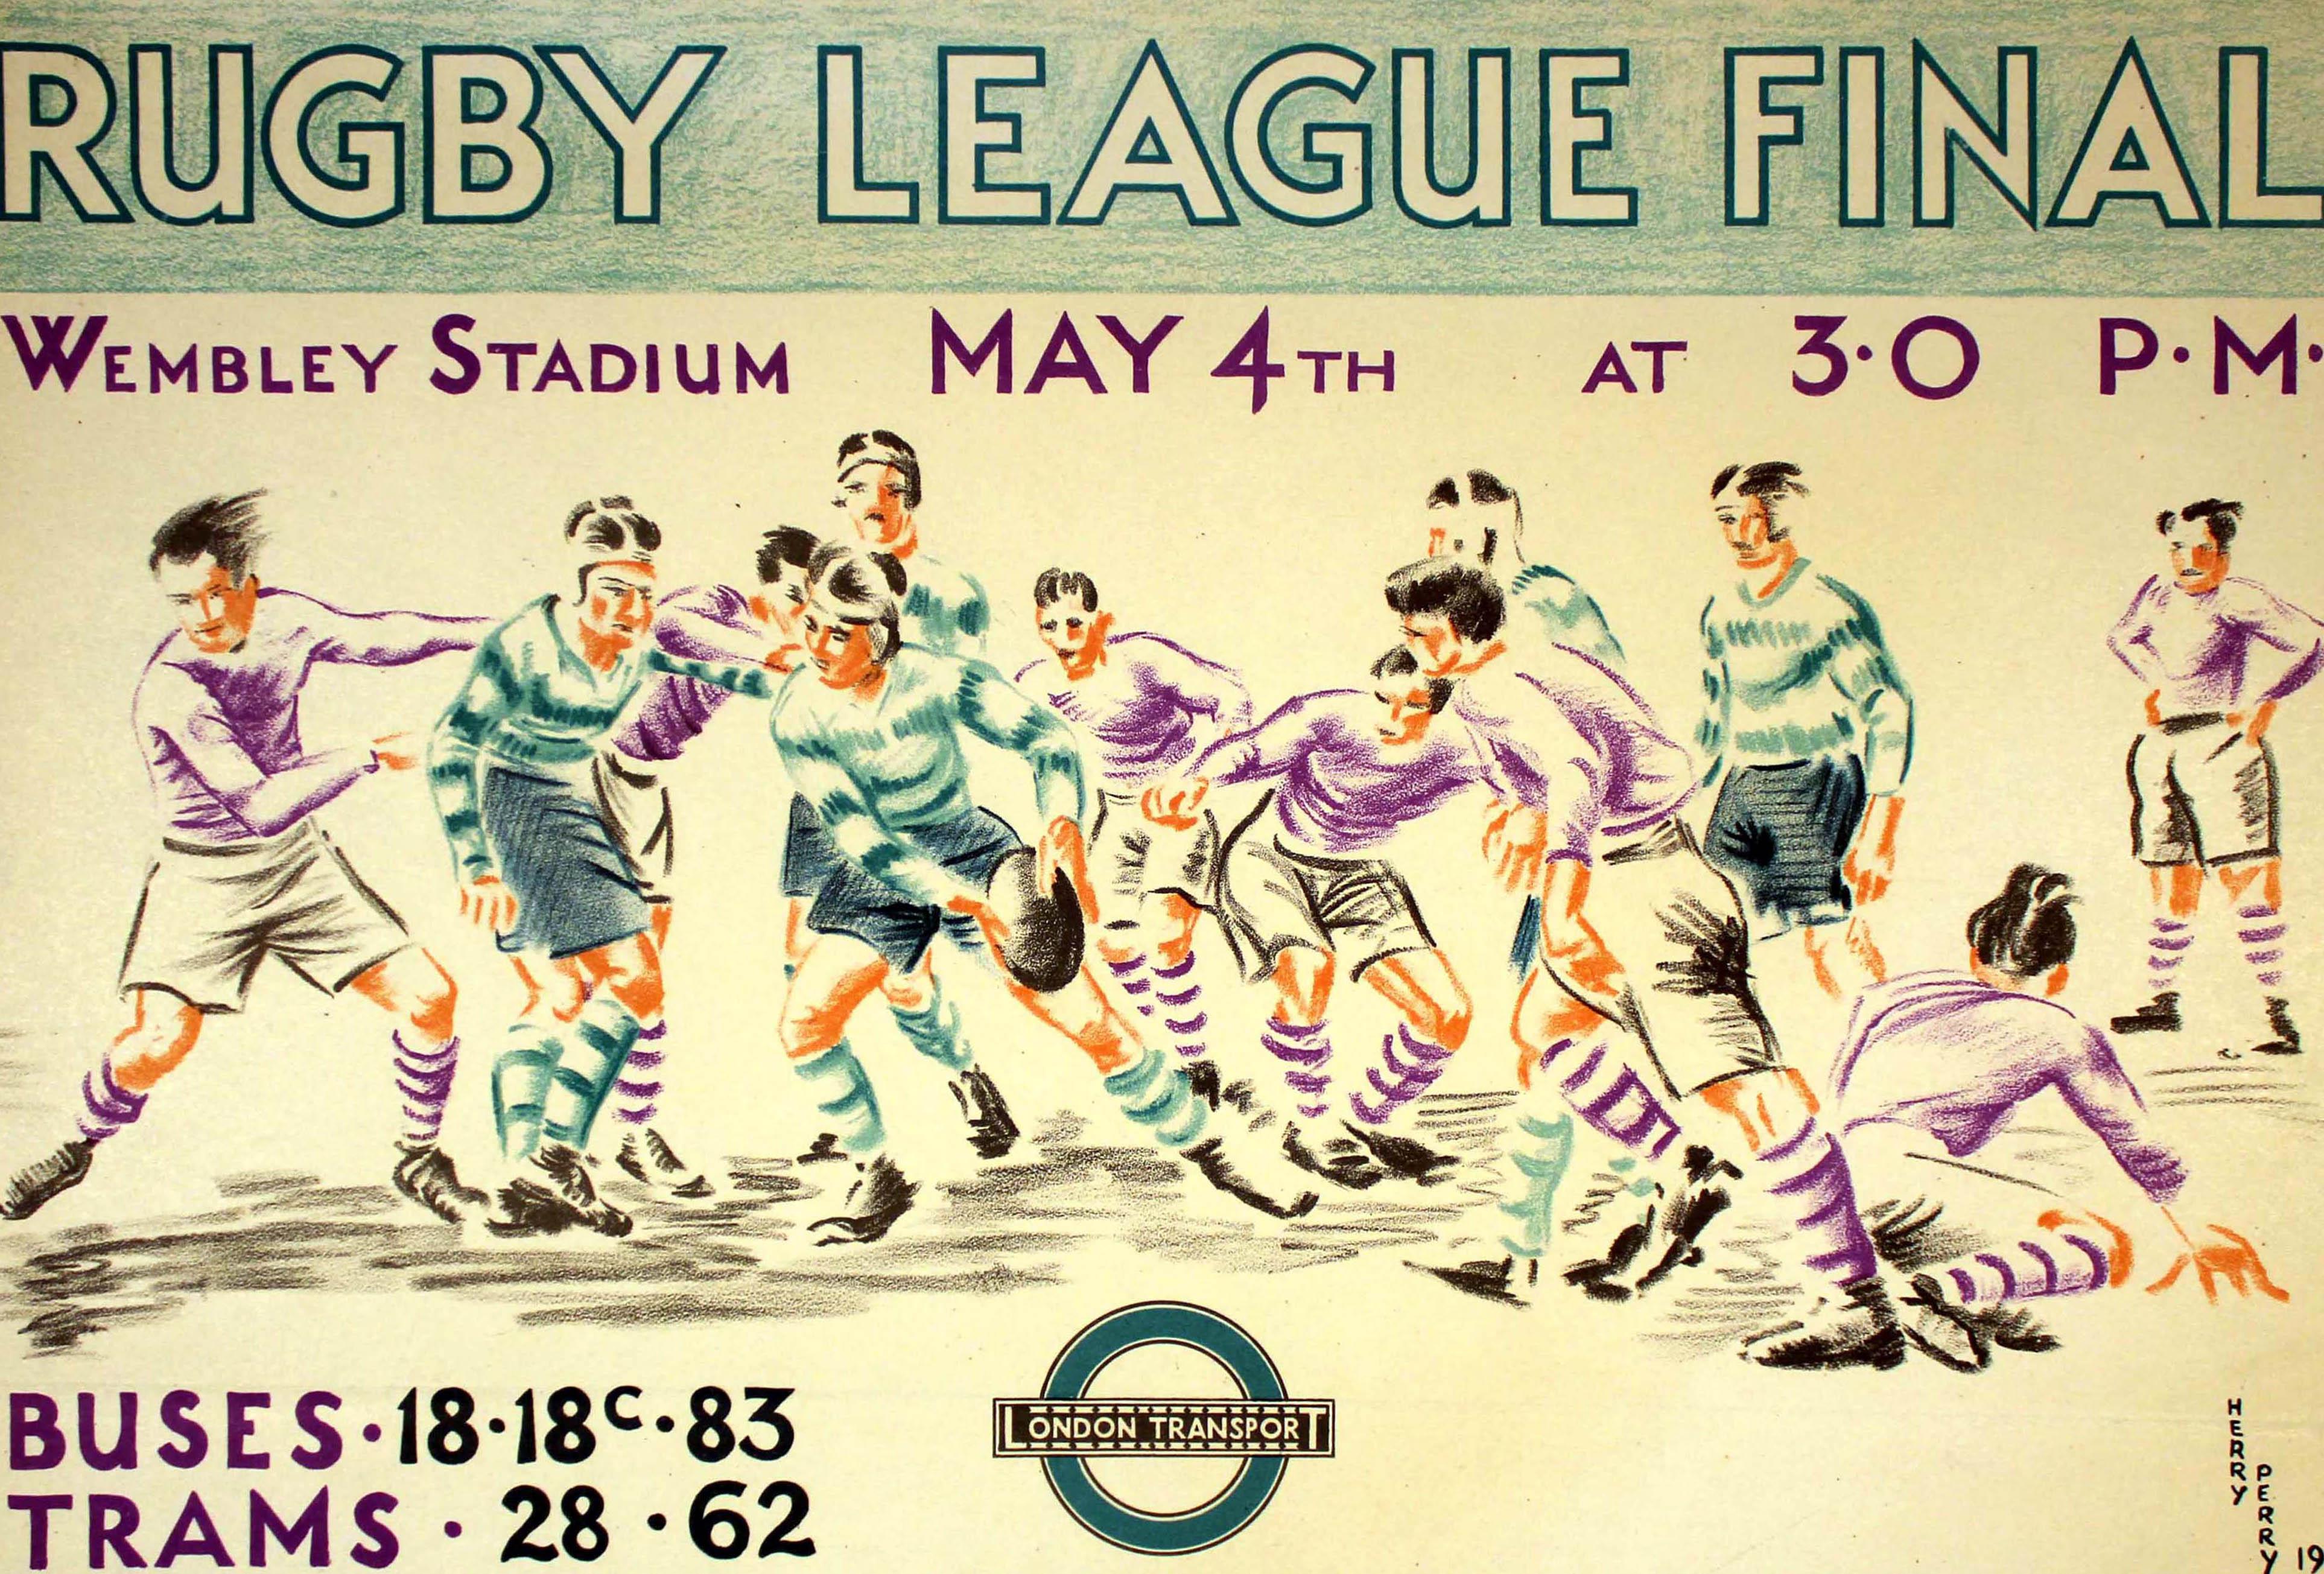 Original Vintage London Transport Rugby League Final Wembley Stadium Herry Perry - Print by Heather Perry